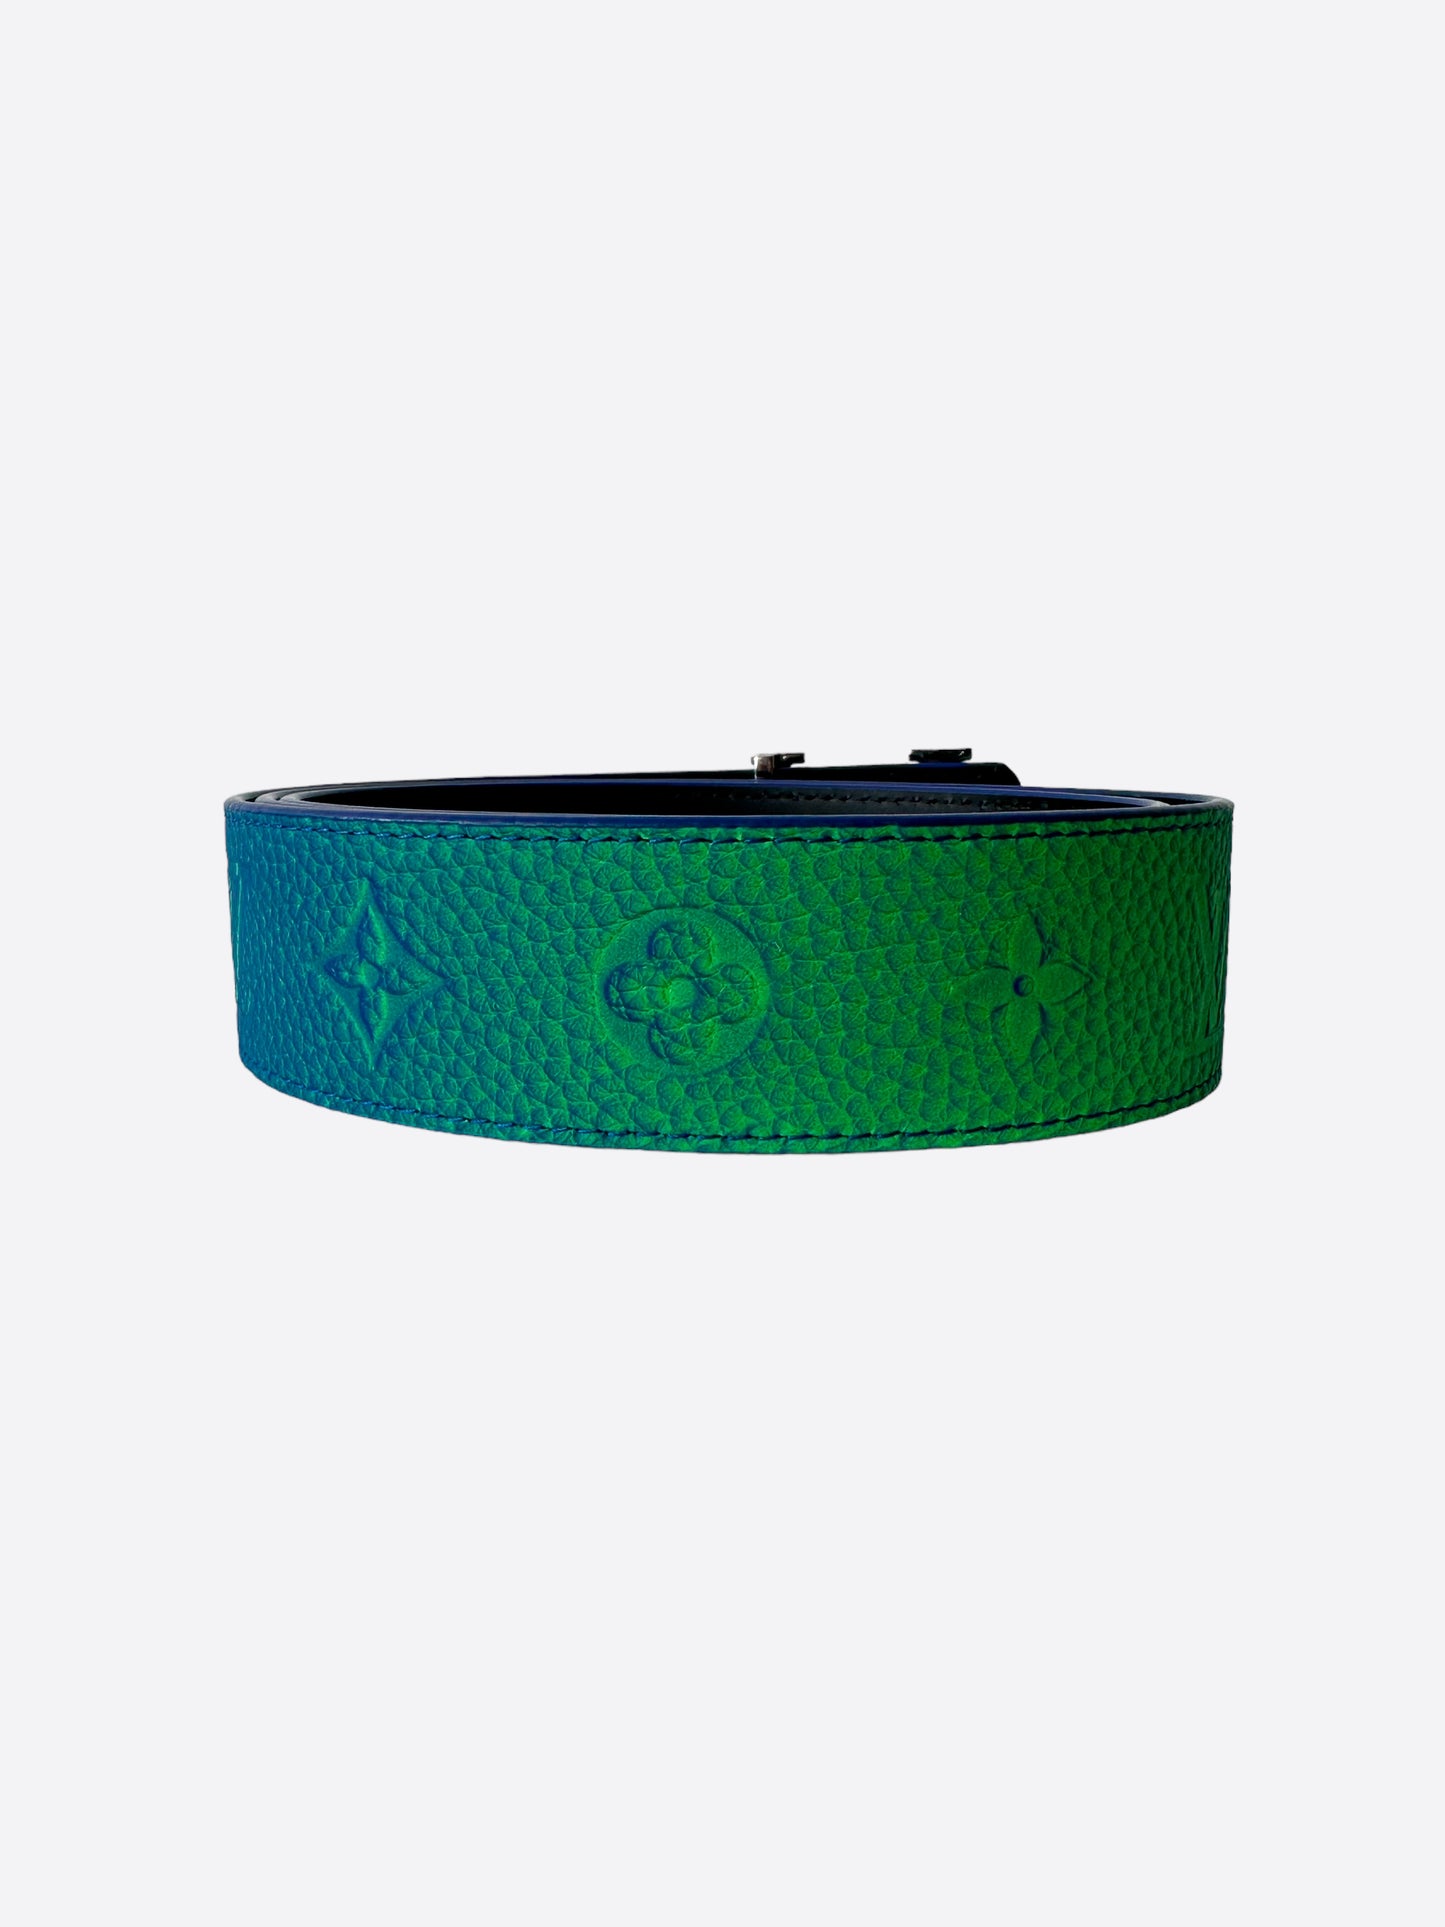 Louis Vuitton belt in blue leather with monogram - DOWNTOWN UPTOWN Genève